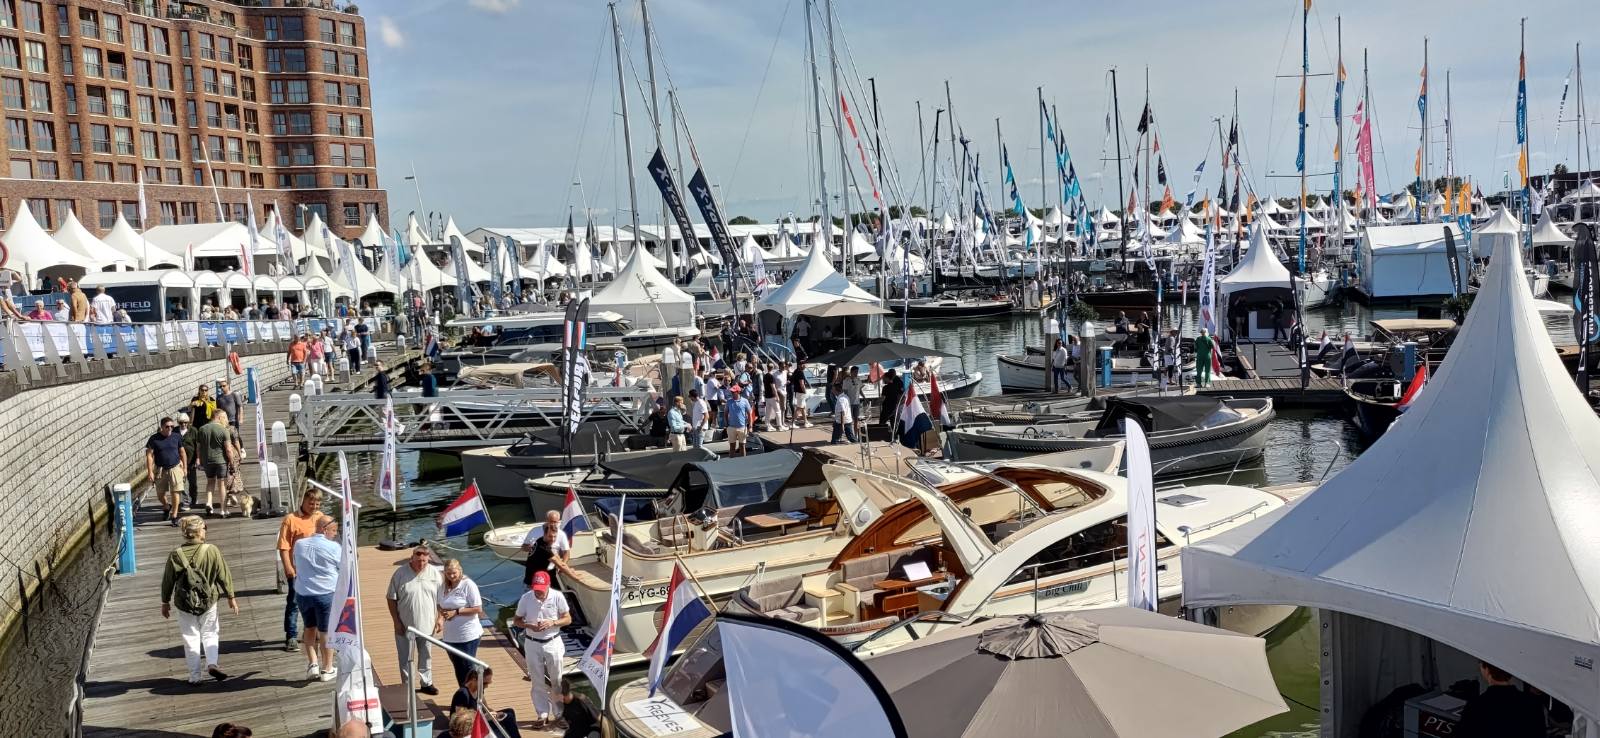 Hiswatewater Boat Show